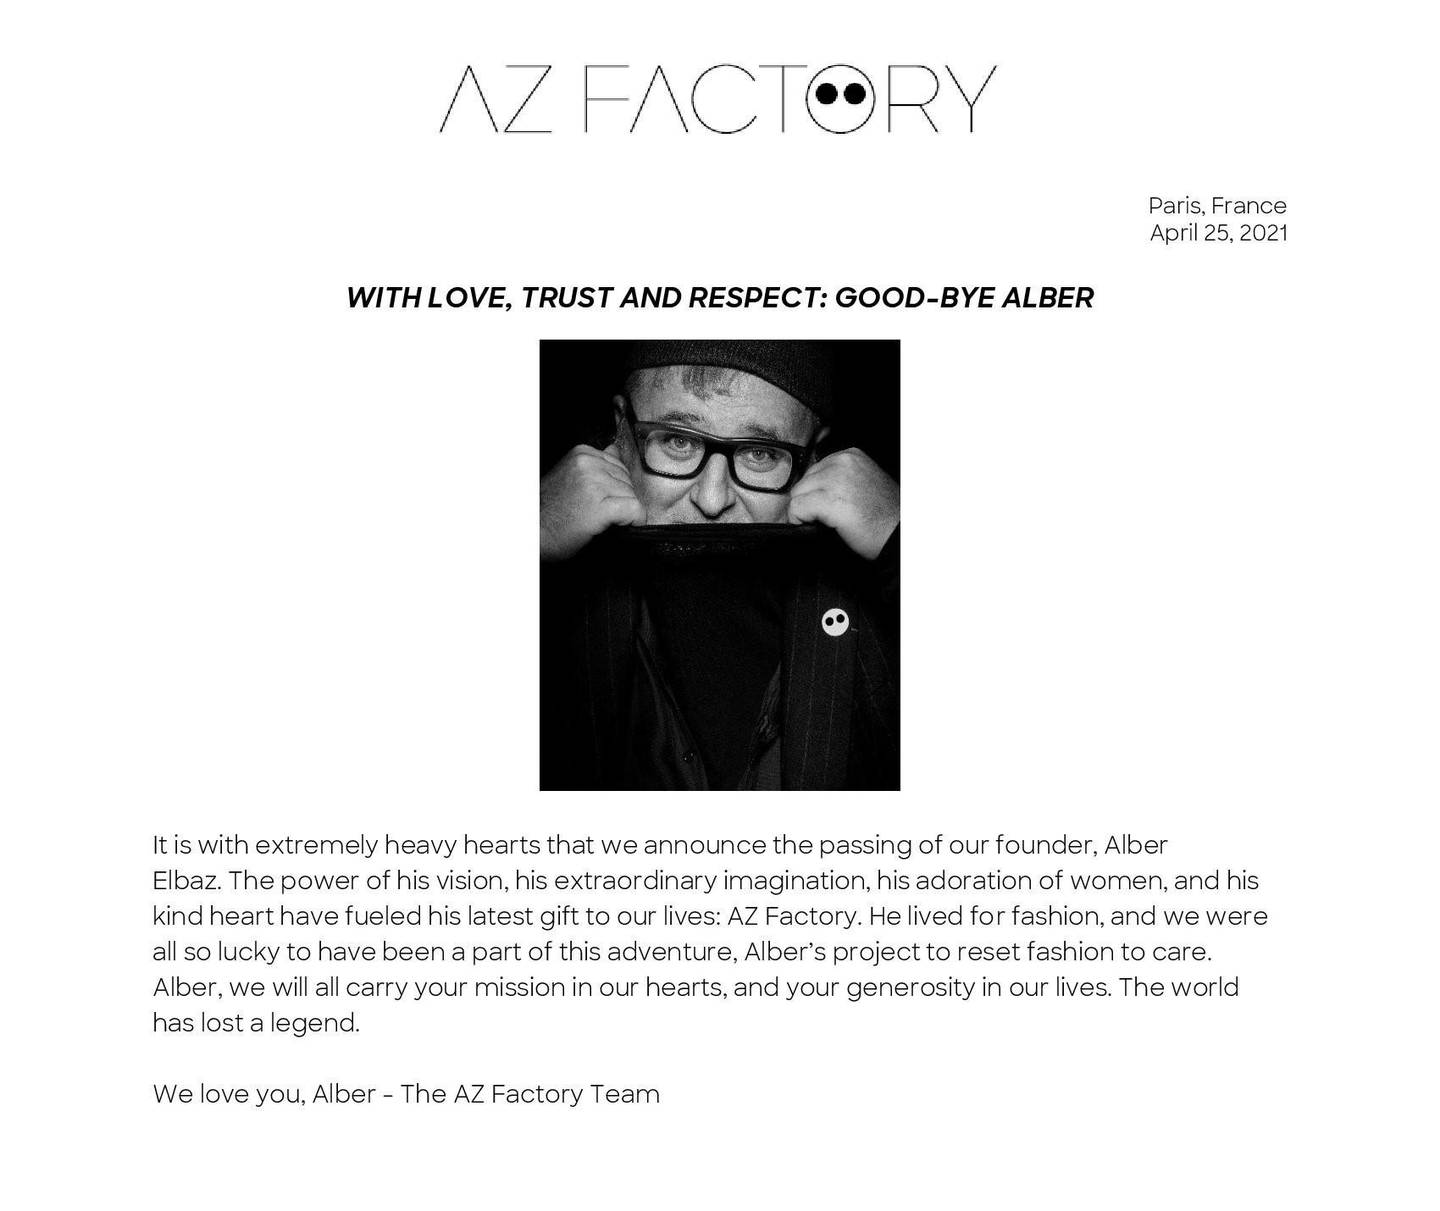 The announcement of Alber Elbaz's death, released by his company AZ Factory. Courtesy AZ Factory